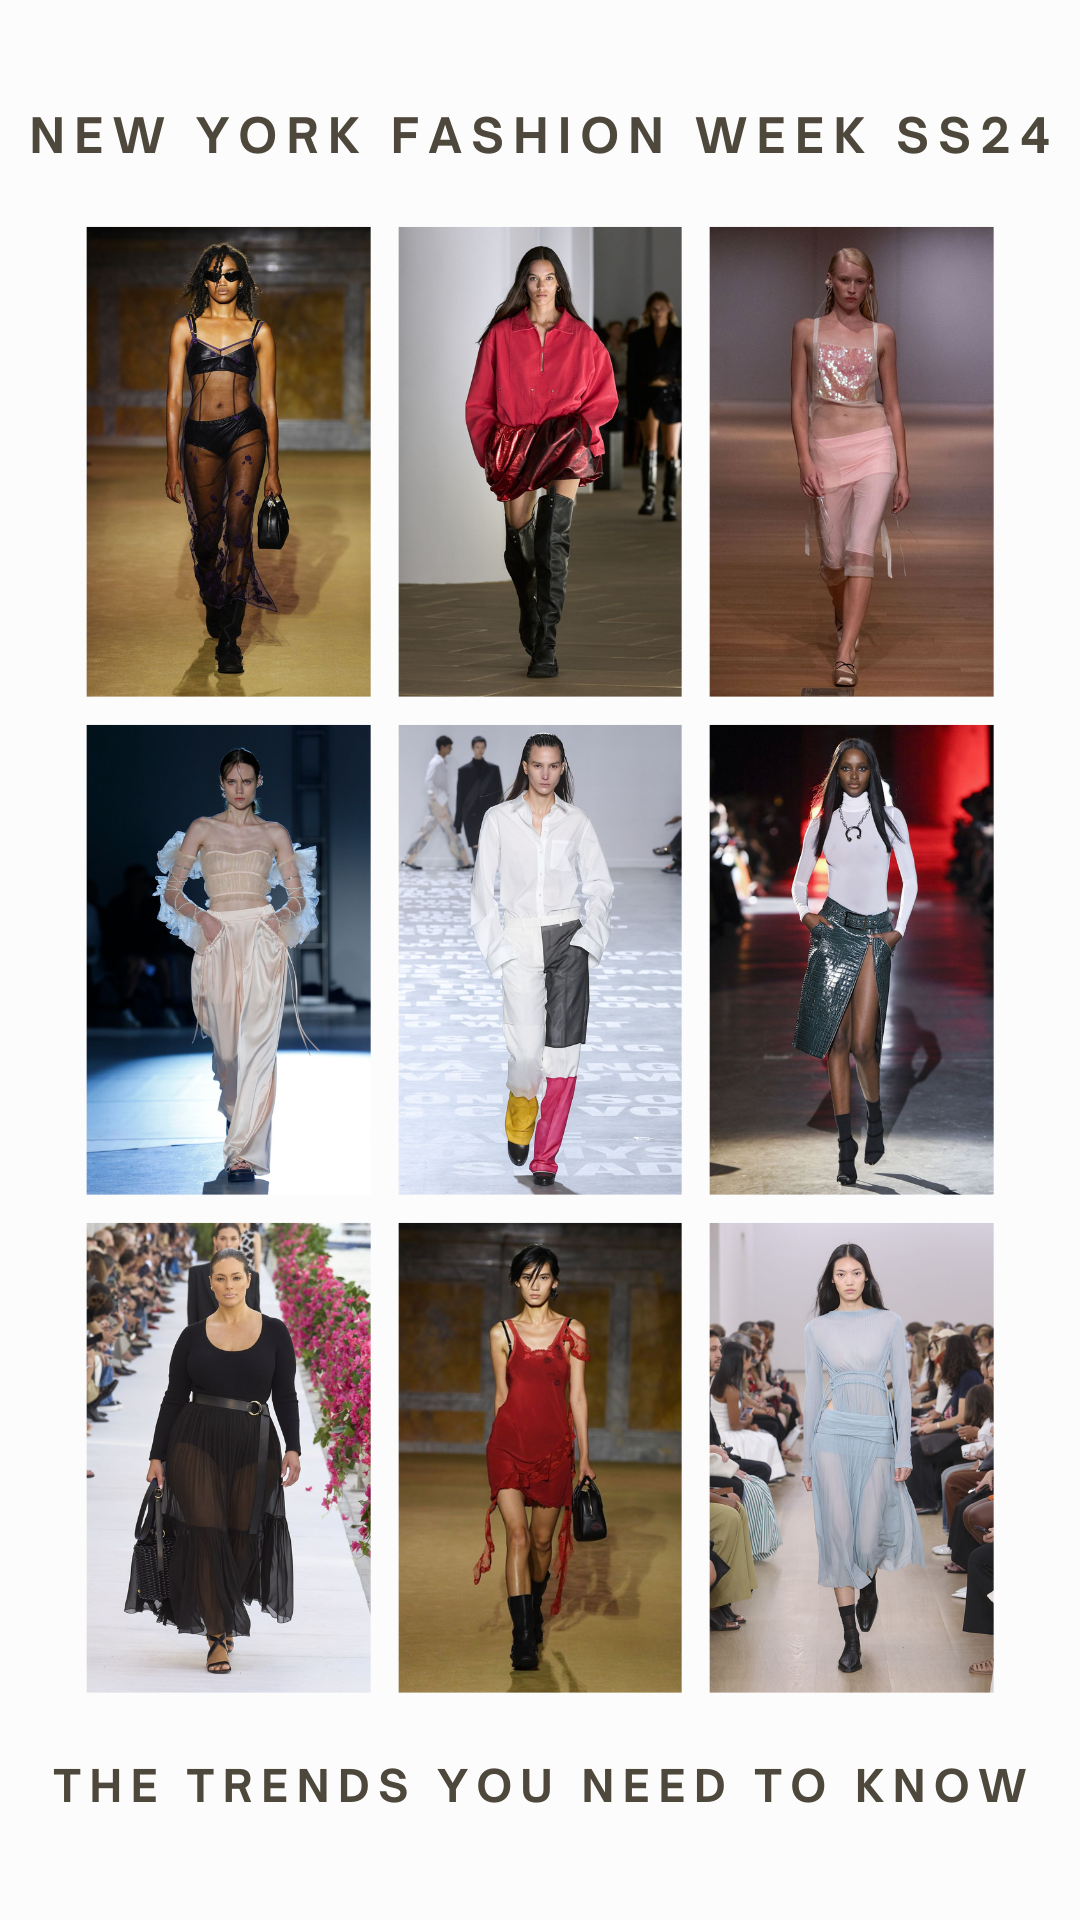 New York Fashion Week SS24 Recap: The Trends You Need to Know